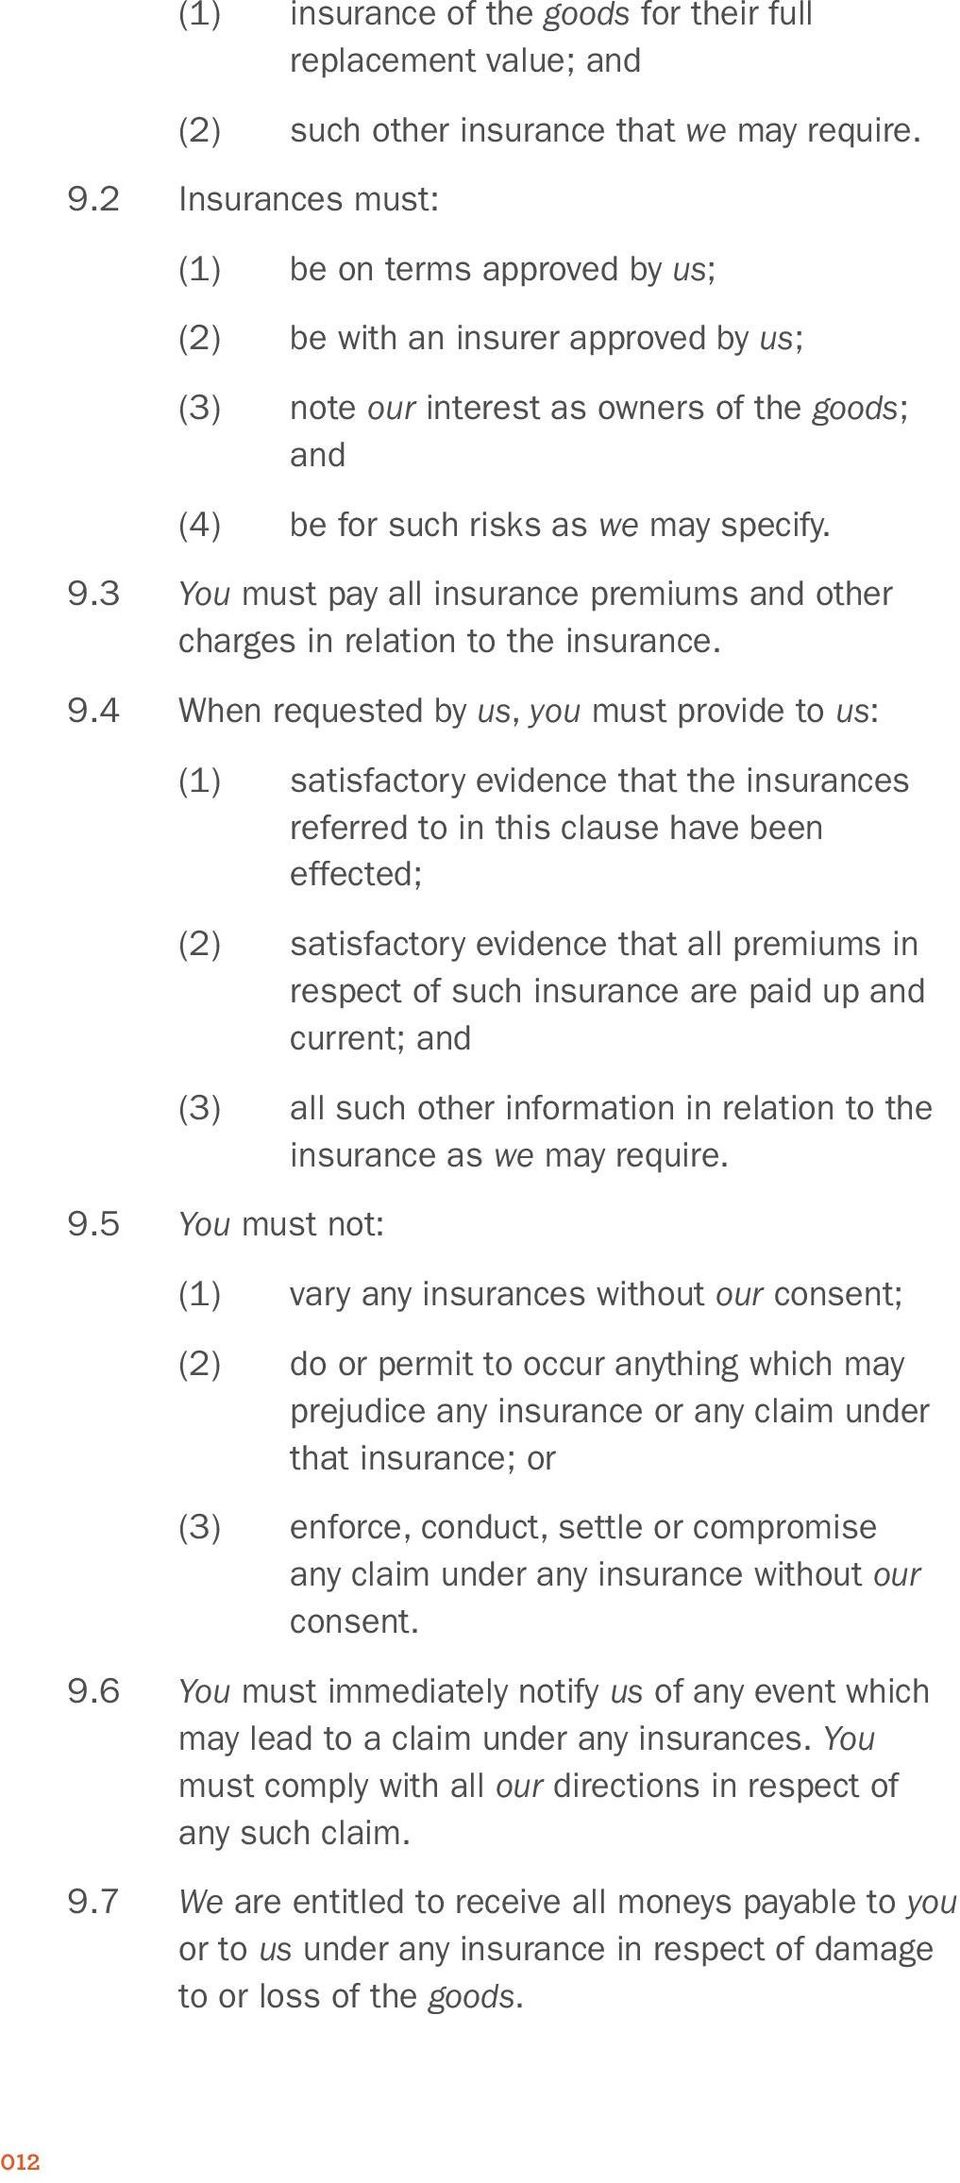 3 You must pay all insurance premiums and other charges in relation to the insurance. 9.